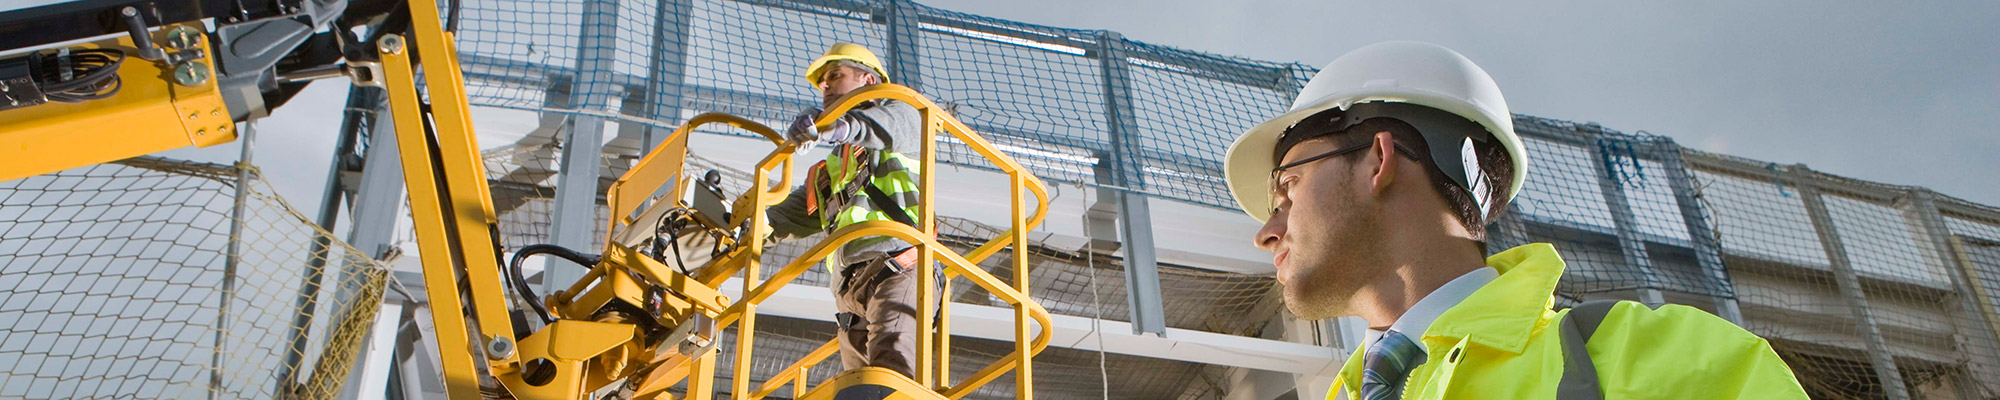 Workplace Health and Safety | Inspections, Training and Inductions | AllSafety Management Services